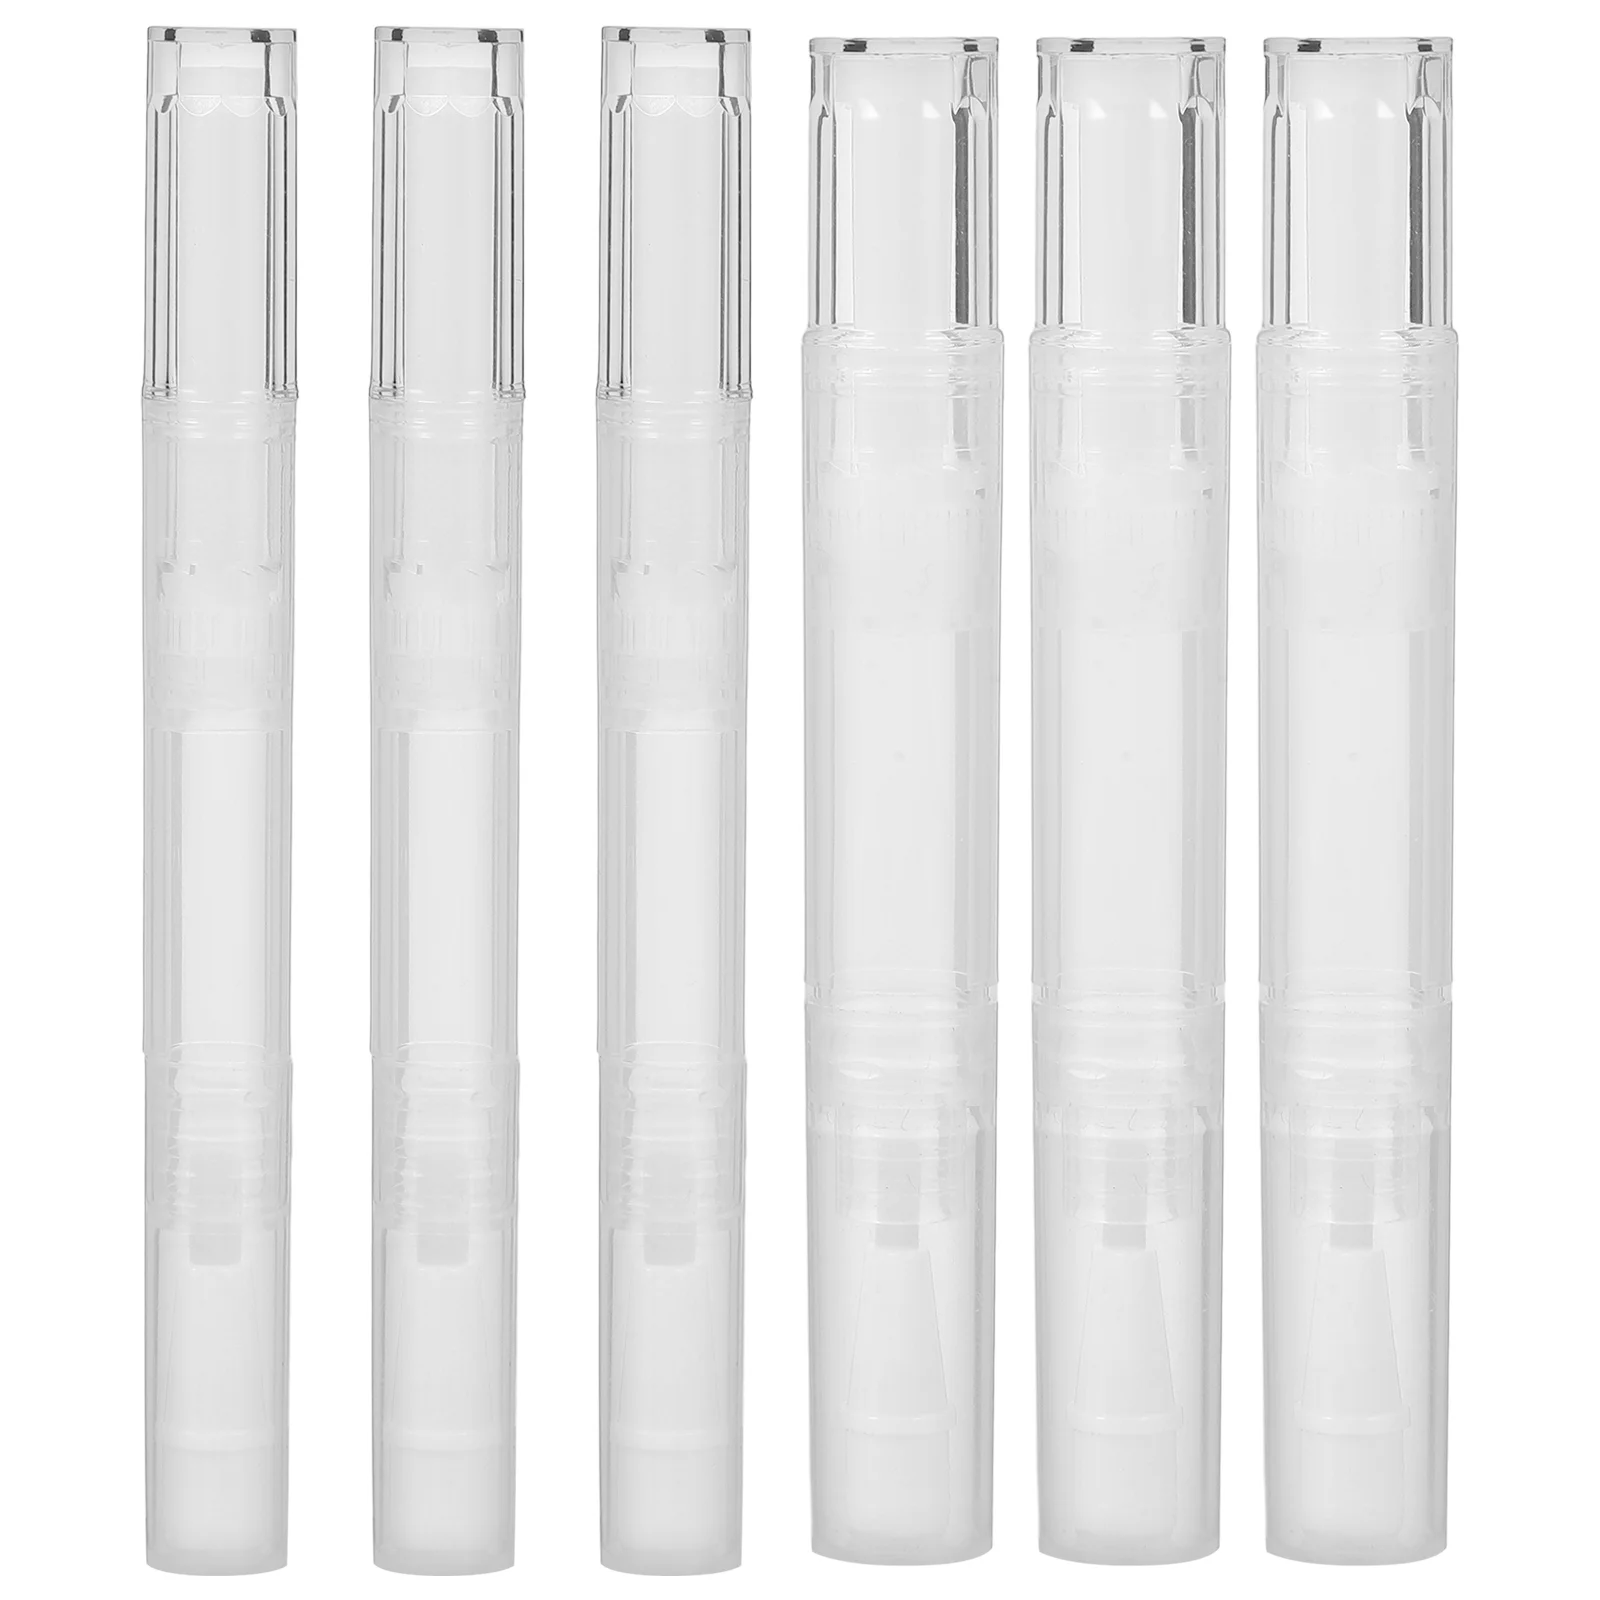 

6 Pcs Empty Lip Gloss Tubes Nail Container Polish Pens Cuticle Oil Refillable Manicure